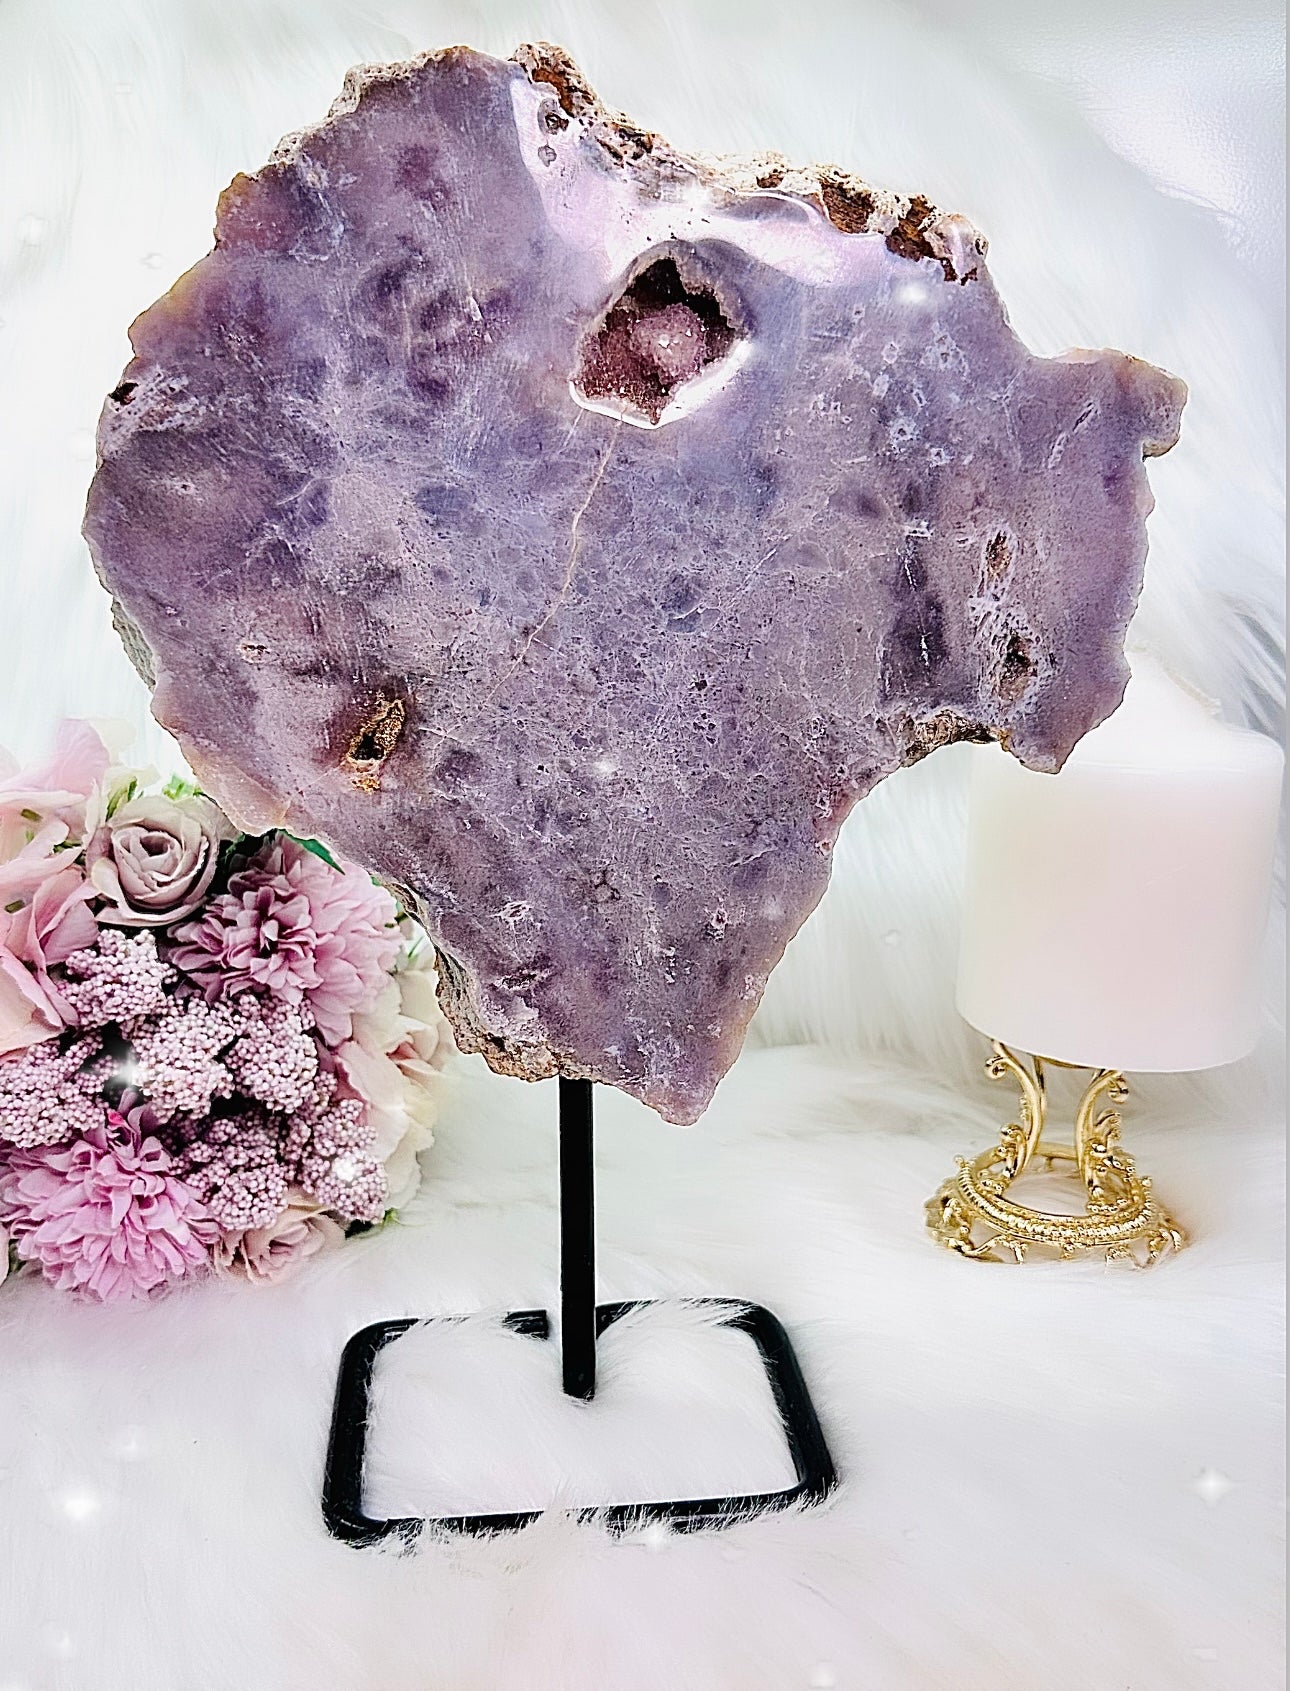 Classy & Absolutely Fabulous Huge 1.68KG Druzy Pink Amethyst Chunky Slab On Stand From
Brazil ~ A Truly Magnificent Piece